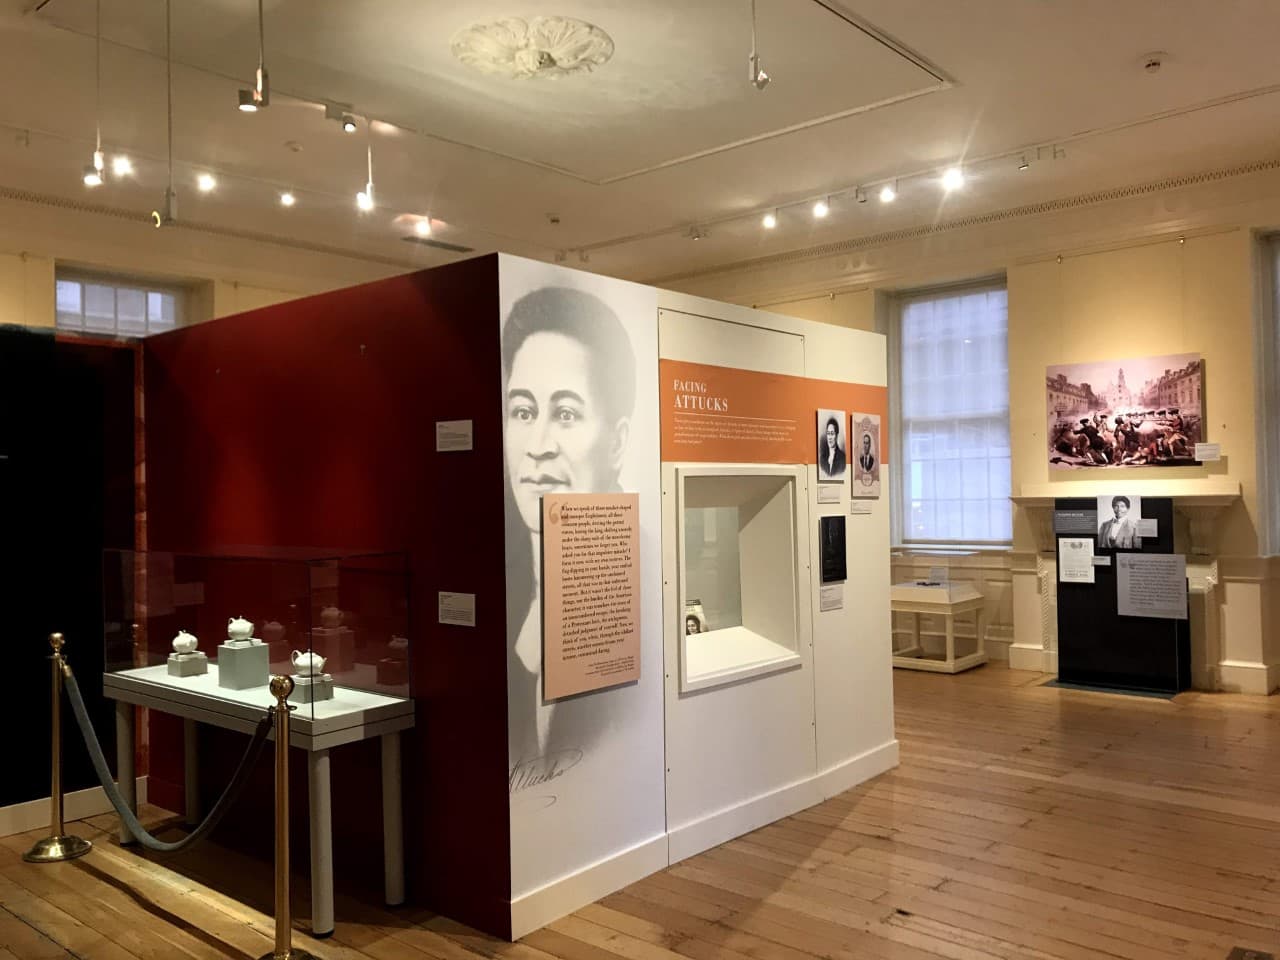 The exhibit will be on display through the summer of 2021. (Courtesy Revolutionary Spaces)